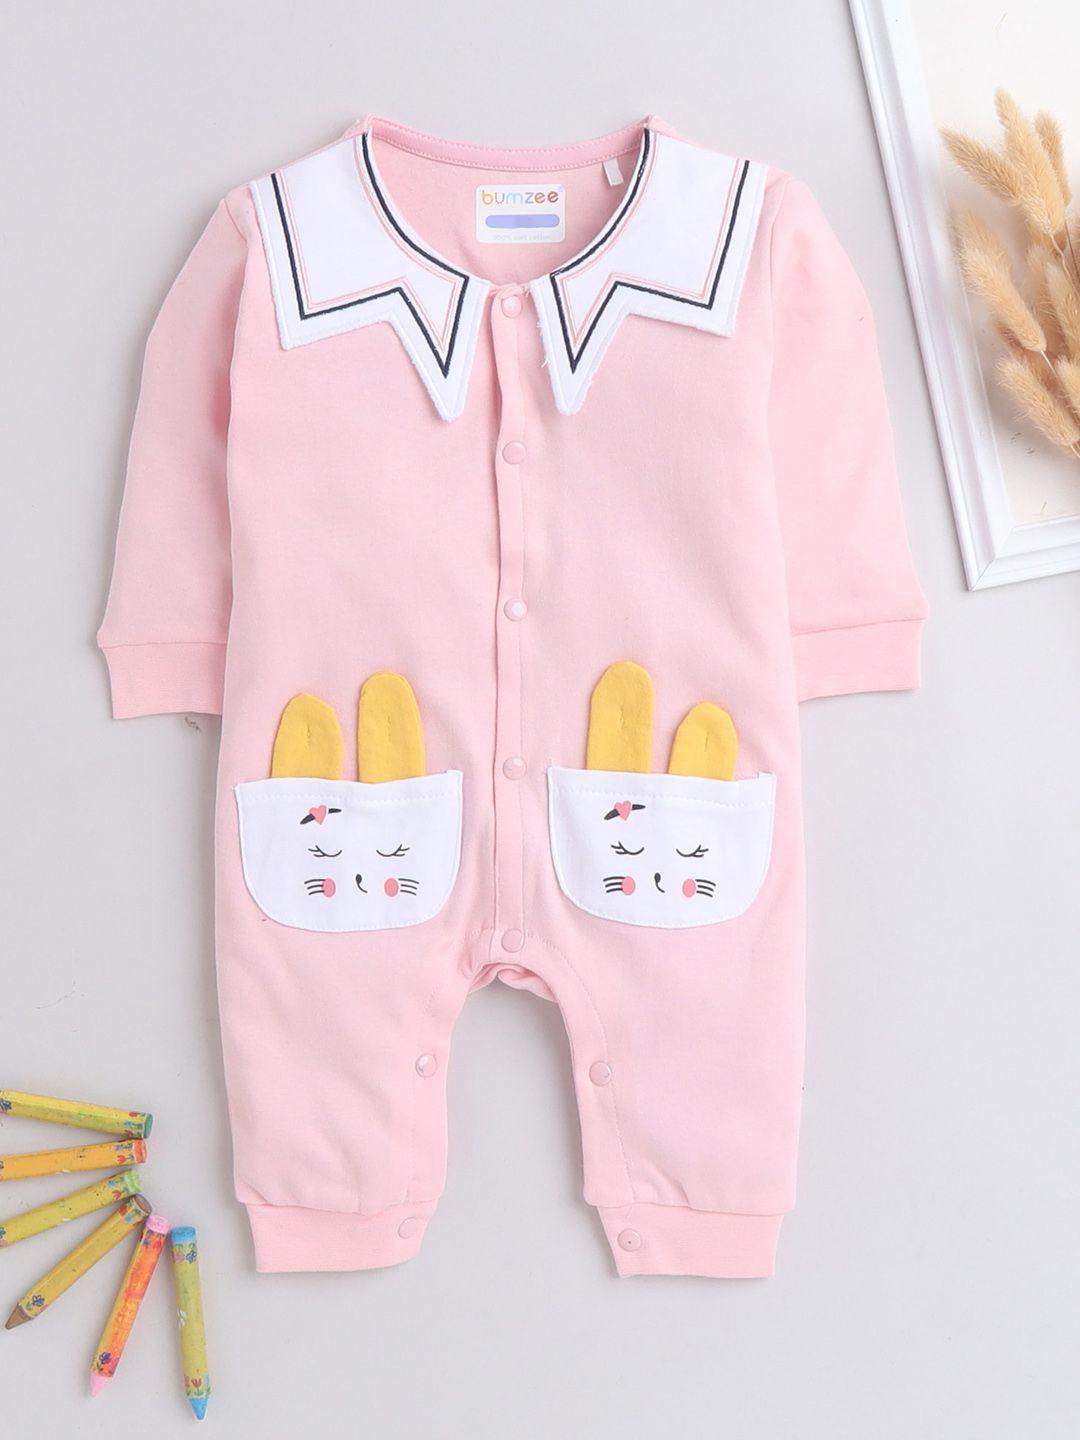 bumzee-girls-pink-&-white-colourblocked-cotton-rompers